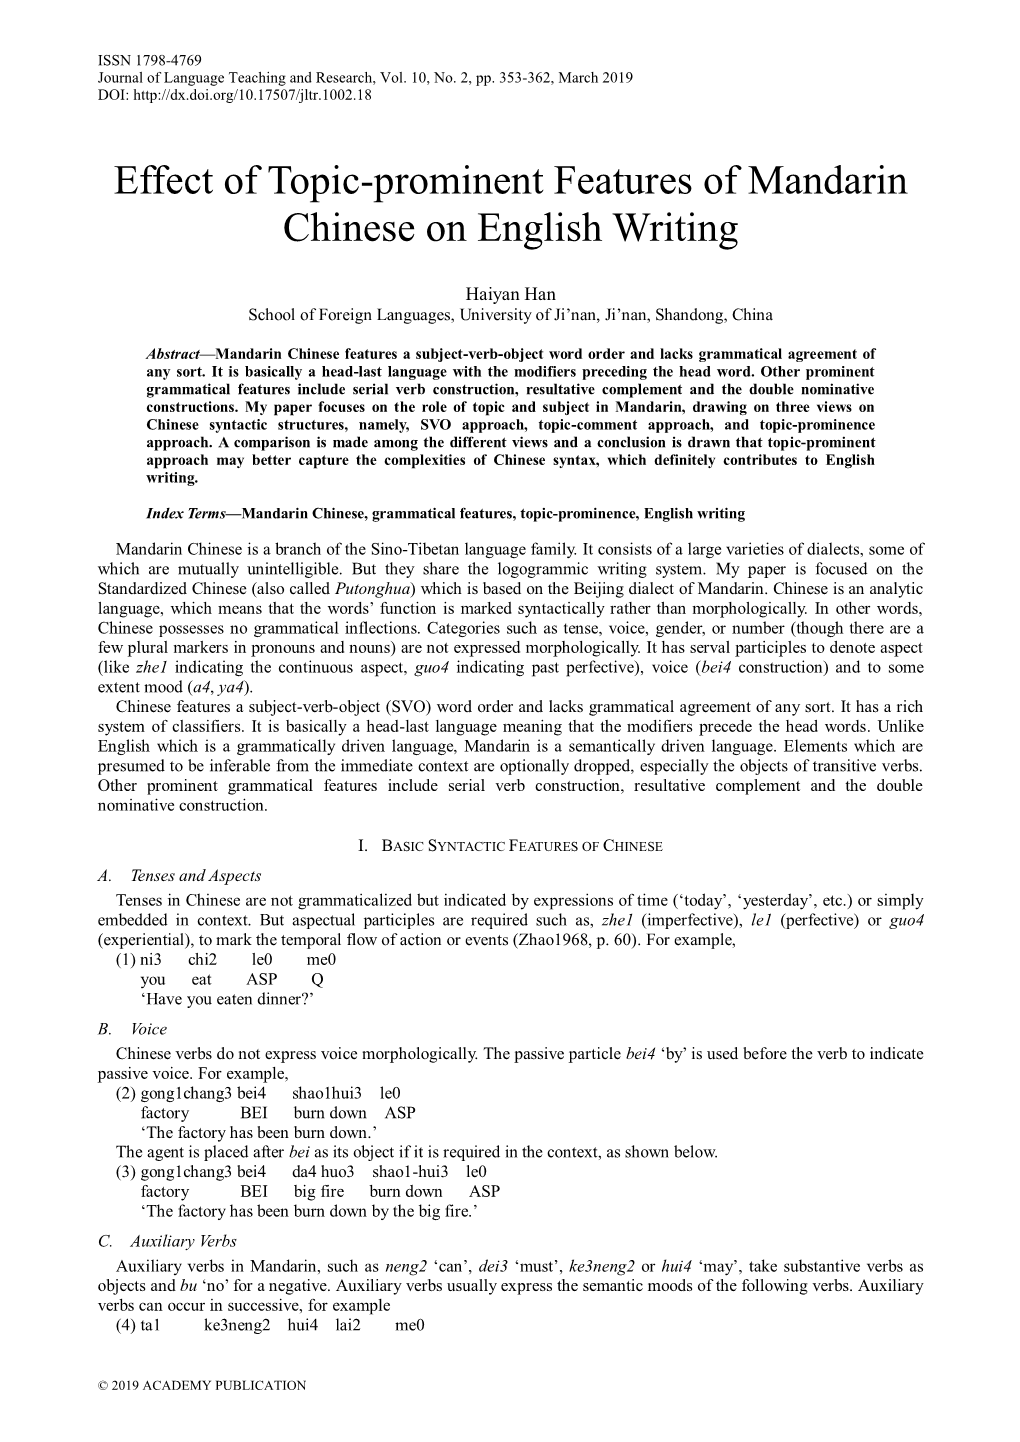 Effect of Topic-Prominent Features of Mandarin Chinese on English Writing